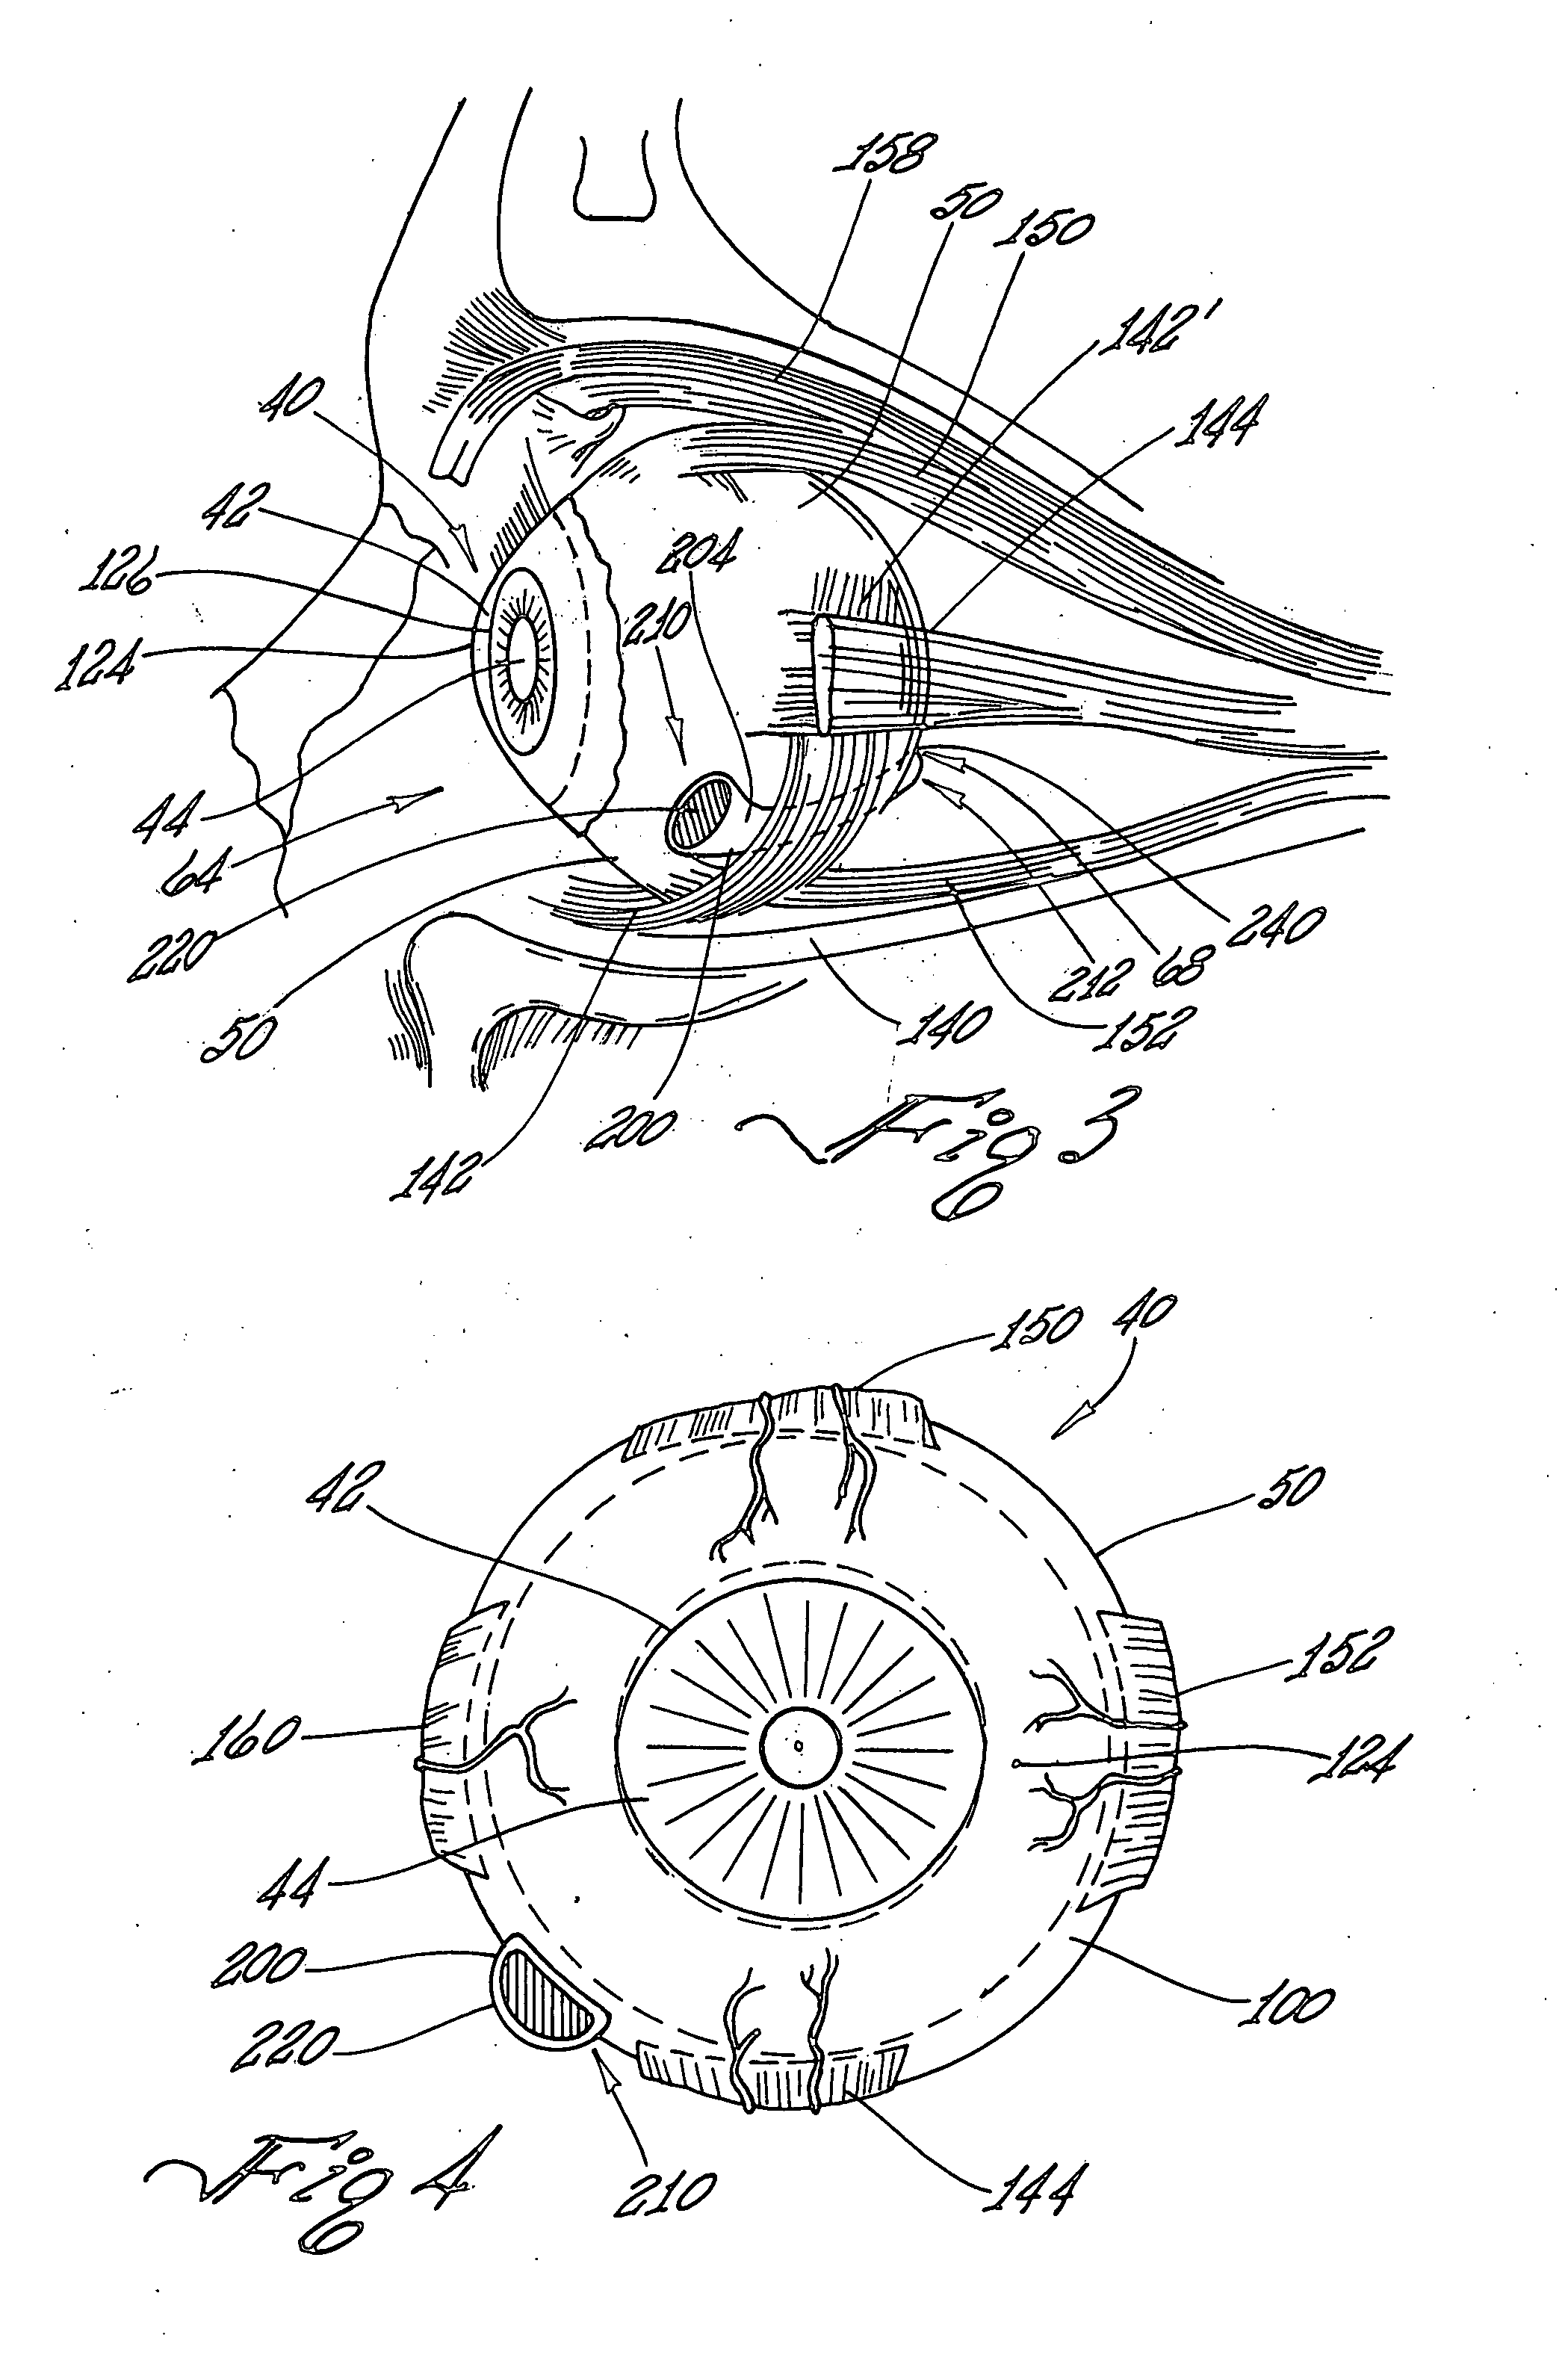 Implantable delivery device for administering pharmacological agents to an internal portion of a body